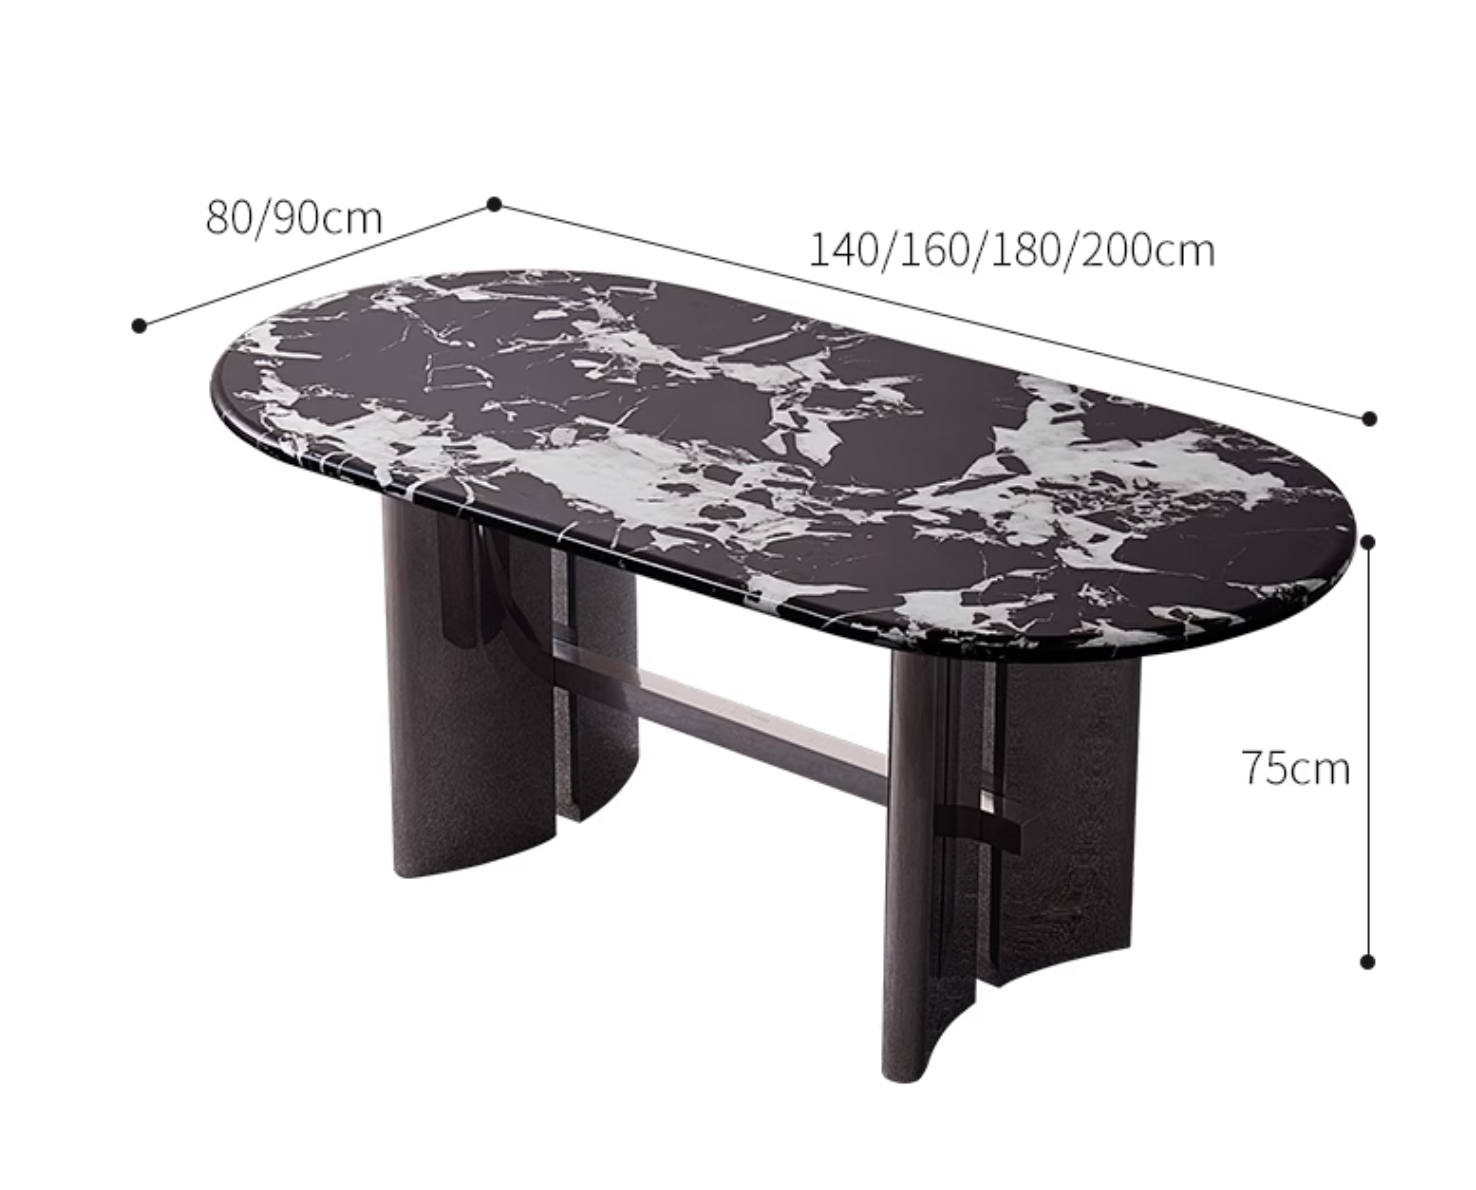 Meroy Dining Table, Marble